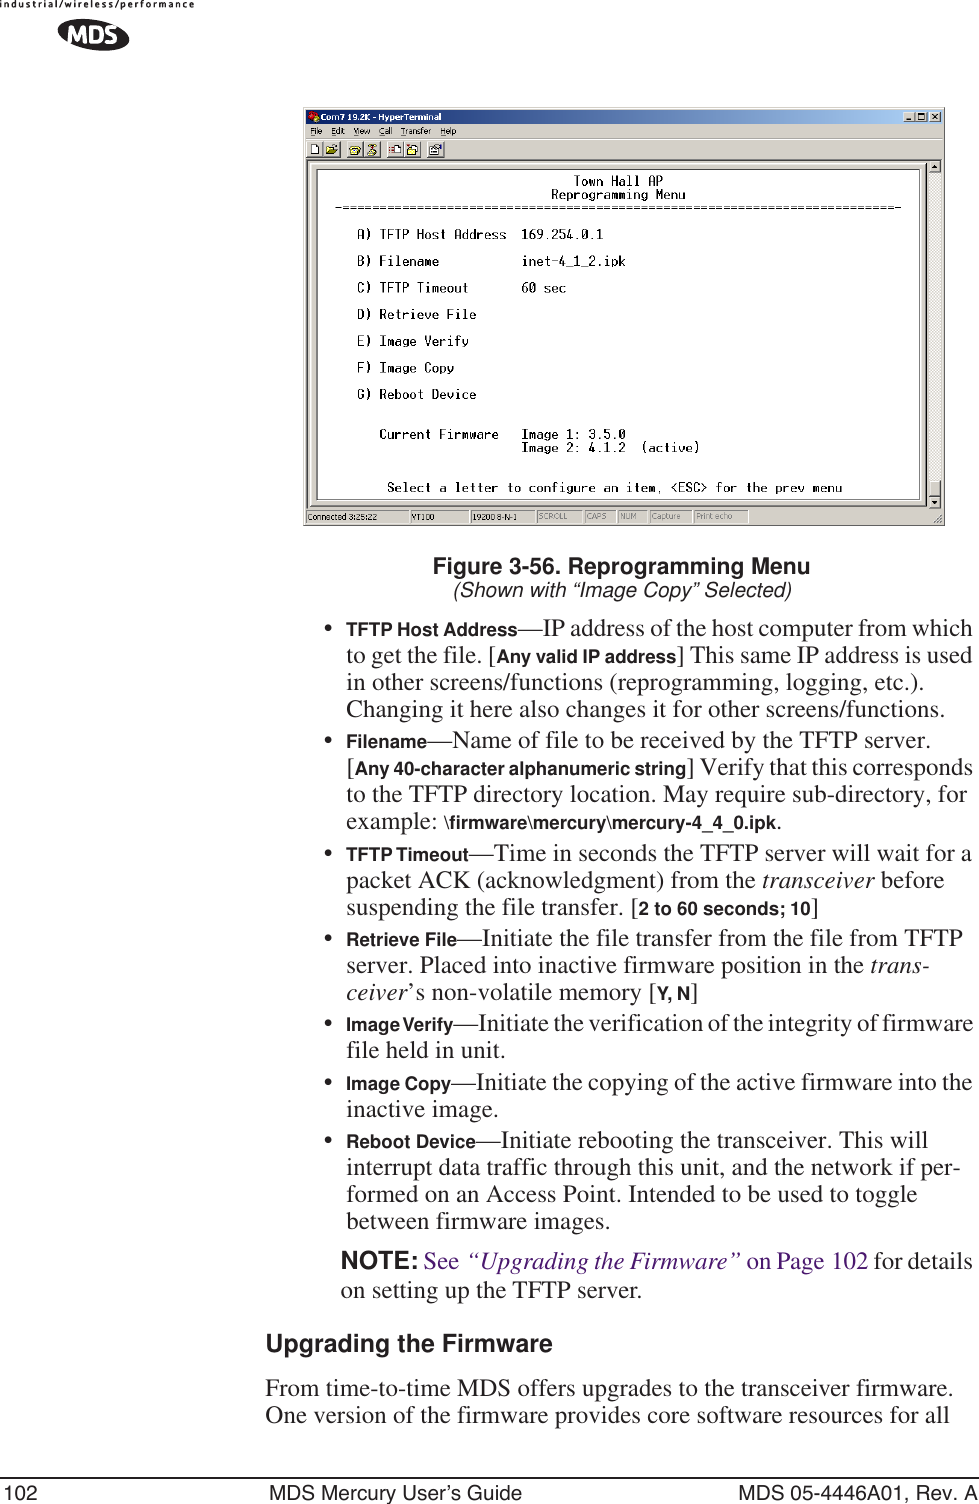 102 MDS Mercury User’s Guide MDS 05-4446A01, Rev. AFigure 3-56. Reprogramming Menu(Shown with “Image Copy” Selected)•TFTP Host Address—IP address of the host computer from which to get the file. [Any valid IP address] This same IP address is used in other screens/functions (reprogramming, logging, etc.). Changing it here also changes it for other screens/functions.•Filename—Name of file to be received by the TFTP server.[Any 40-character alphanumeric string] Verify that this corresponds to the TFTP directory location. May require sub-directory, for example: \ﬁrmware\mercury\mercury-4_4_0.ipk.•TFTP Timeout—Time in seconds the TFTP server will wait for a packet ACK (acknowledgment) from the transceiver before suspending the file transfer. [2 to 60 seconds; 10]•Retrieve File—Initiate the file transfer from the file from TFTP server. Placed into inactive firmware position in the trans-ceiver’s non-volatile memory [Y, N]•Image Verify—Initiate the verification of the integrity of firmware file held in unit.•Image Copy—Initiate the copying of the active firmware into the inactive image.•Reboot Device—Initiate rebooting the transceiver. This will interrupt data traffic through this unit, and the network if per-formed on an Access Point. Intended to be used to toggle between firmware images.NOTE: See “Upgrading the Firmware” on Page 102 for details on setting up the TFTP server.Upgrading the FirmwareFrom time-to-time MDS offers upgrades to the transceiver firmware. One version of the firmware provides core software resources for all 